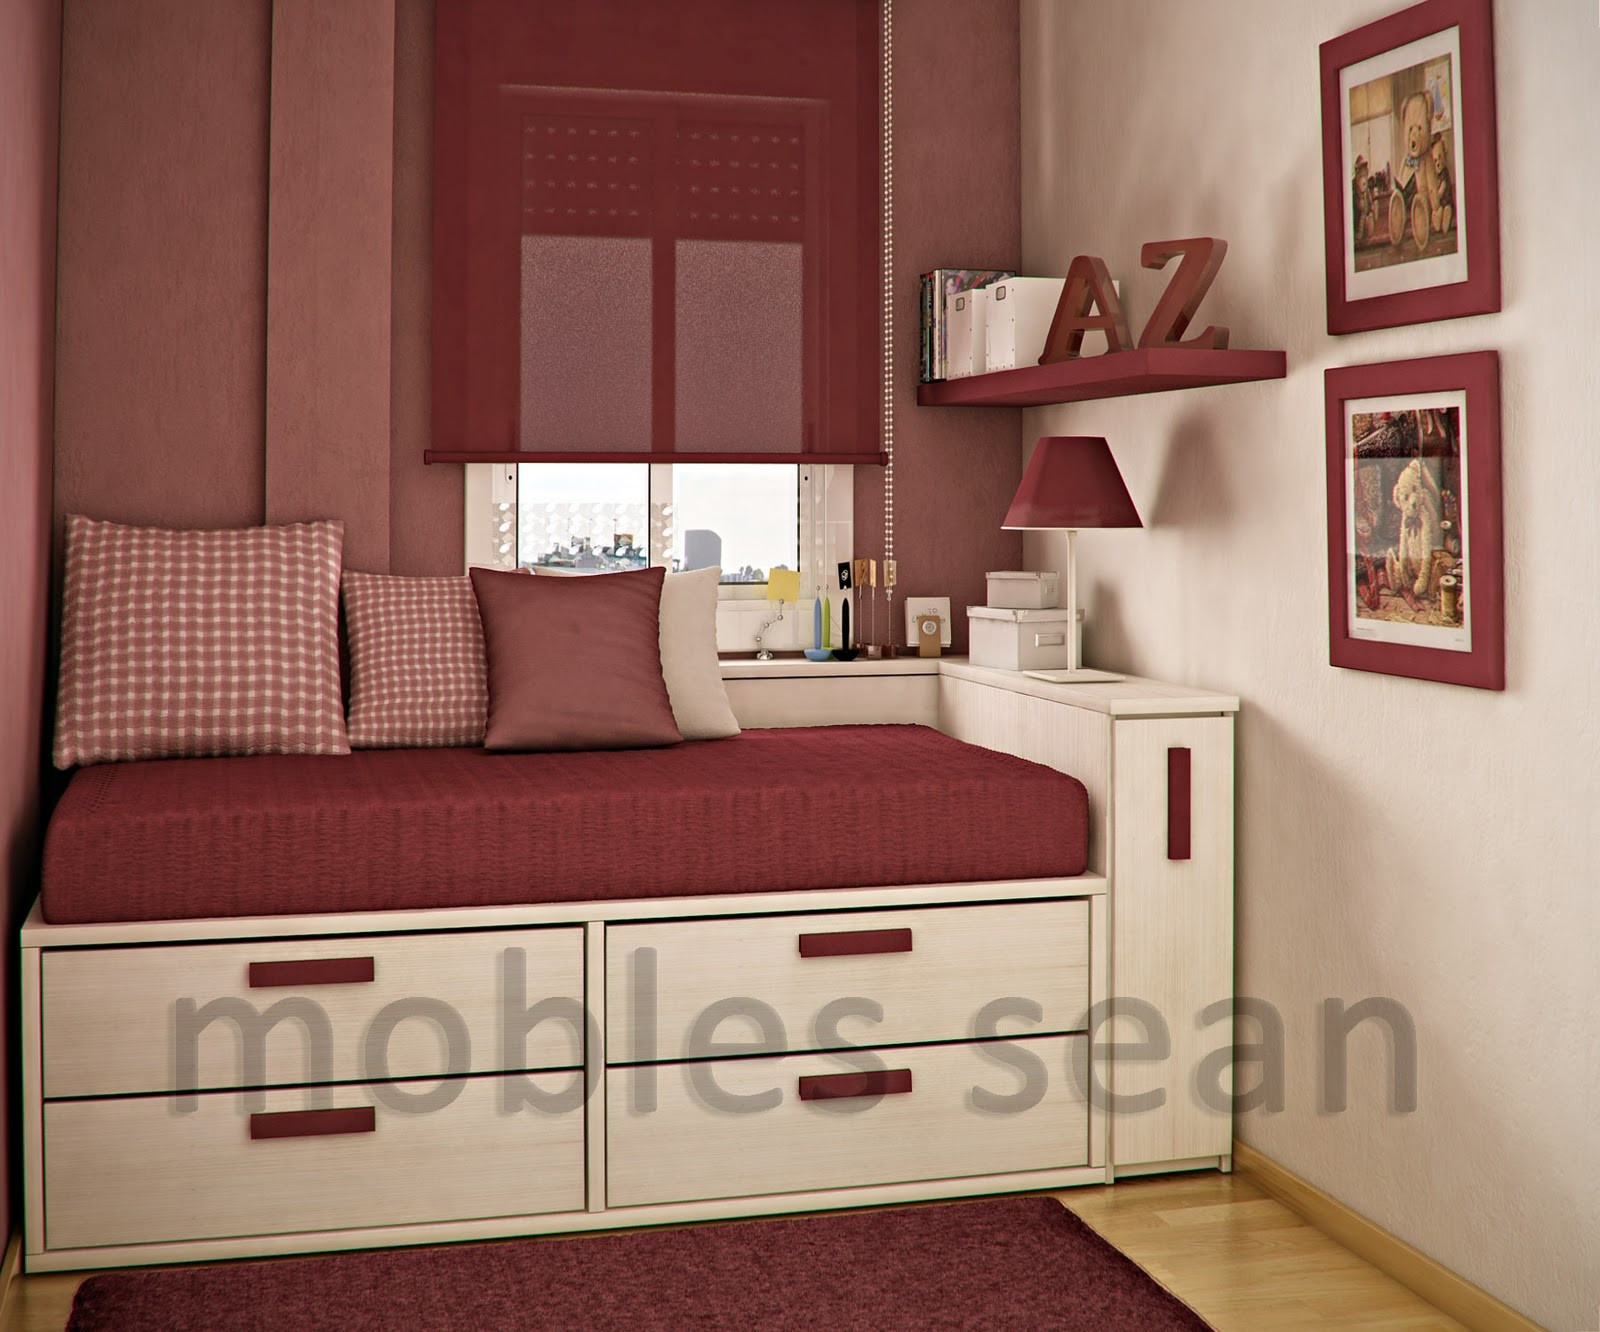 Bedroom Design For Small Space
 Space Saving Designs for Small Kids Rooms